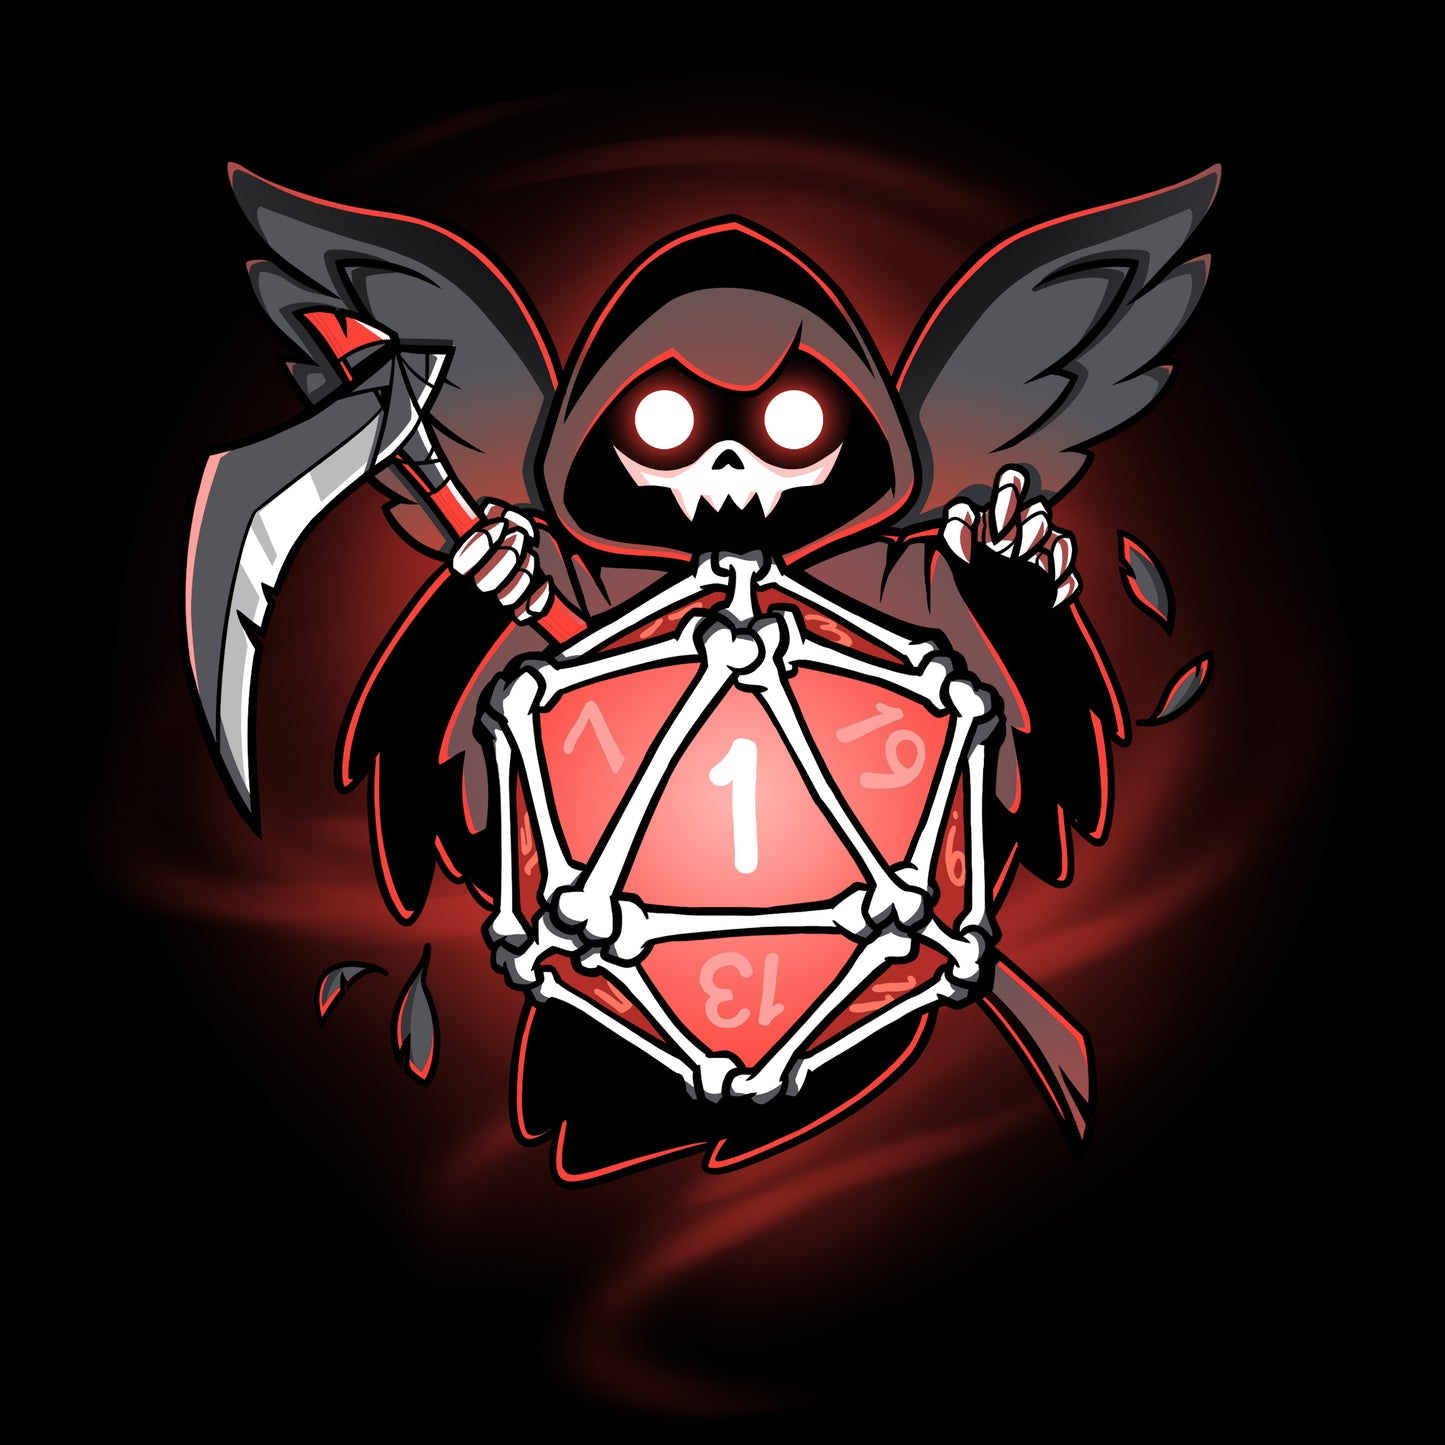 A Grim Reaper holding a red dice became the Grim Reaper's Roll by TeeTurtle.